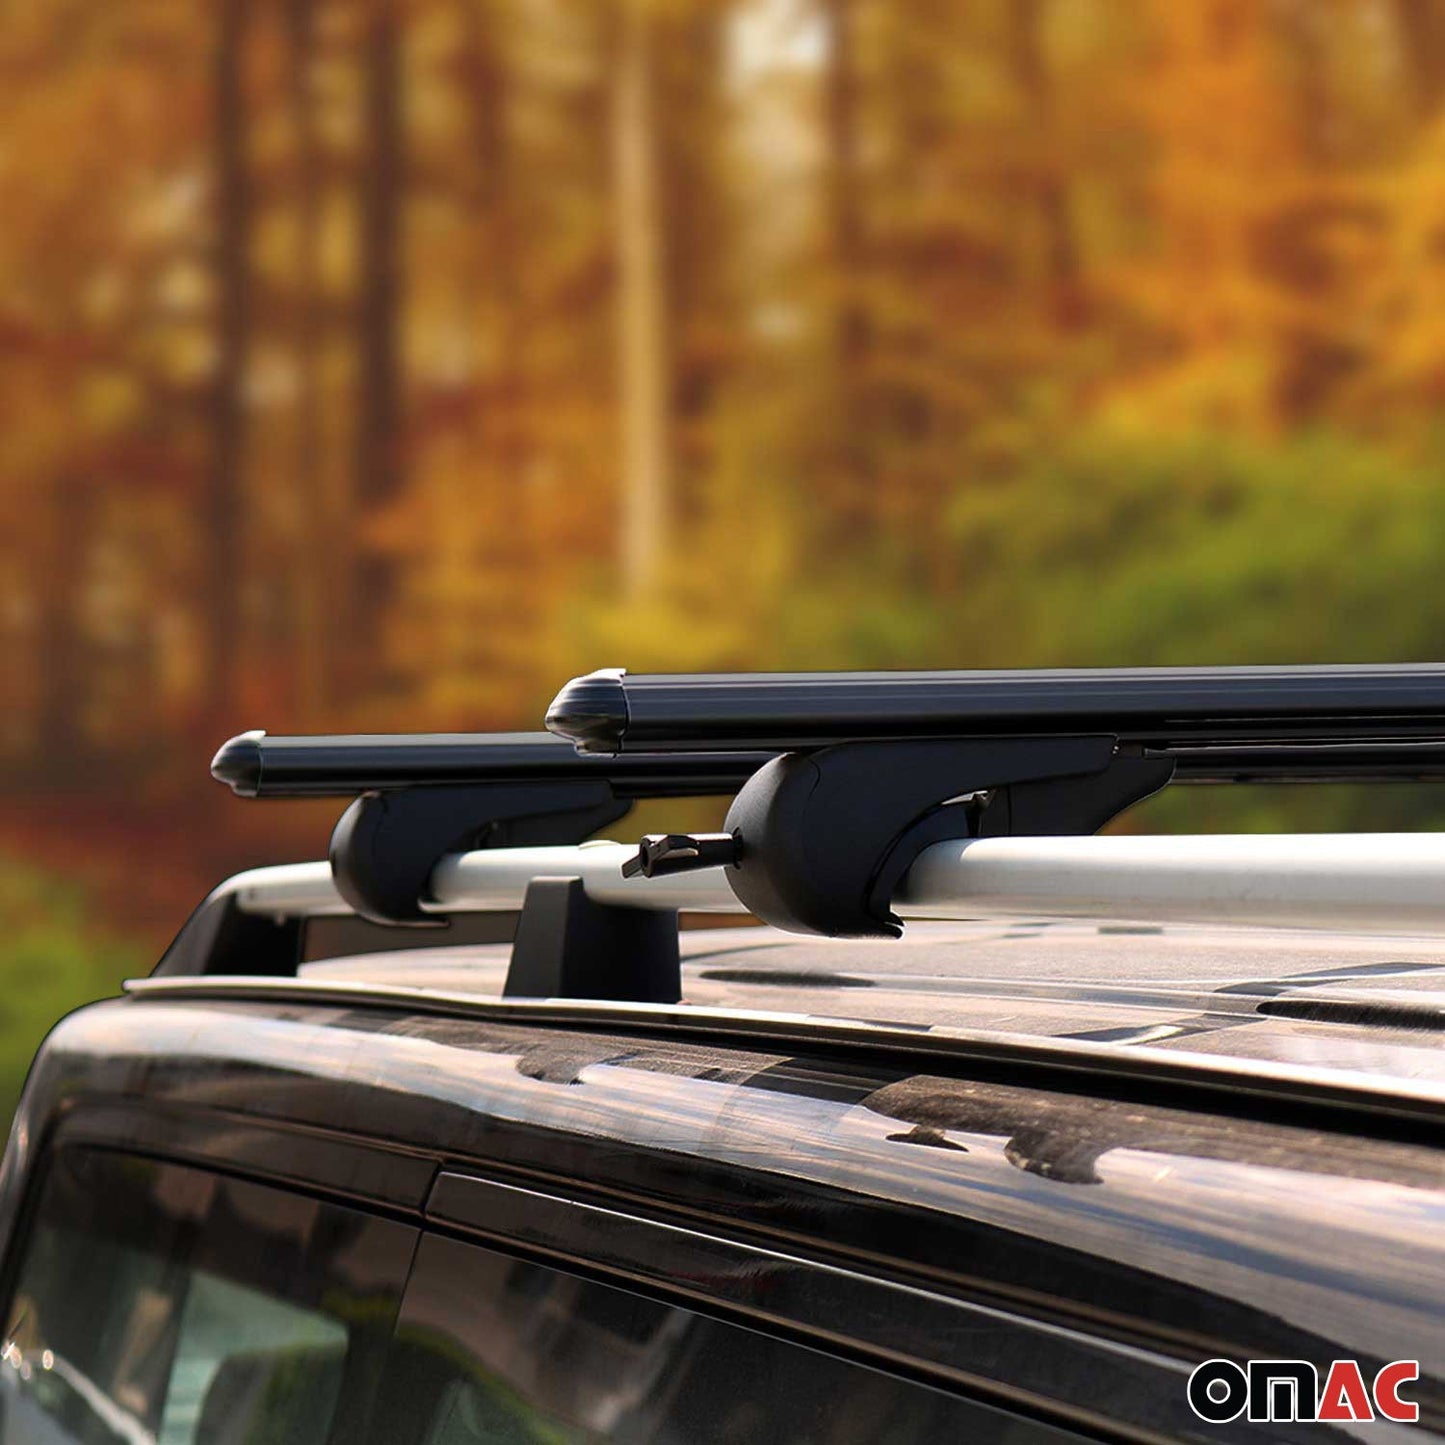 OMAC Lockable Roof Rack Cross Bars Luggage Carrier for Jeep Patriot 2007-2017 Black 17059696929MB